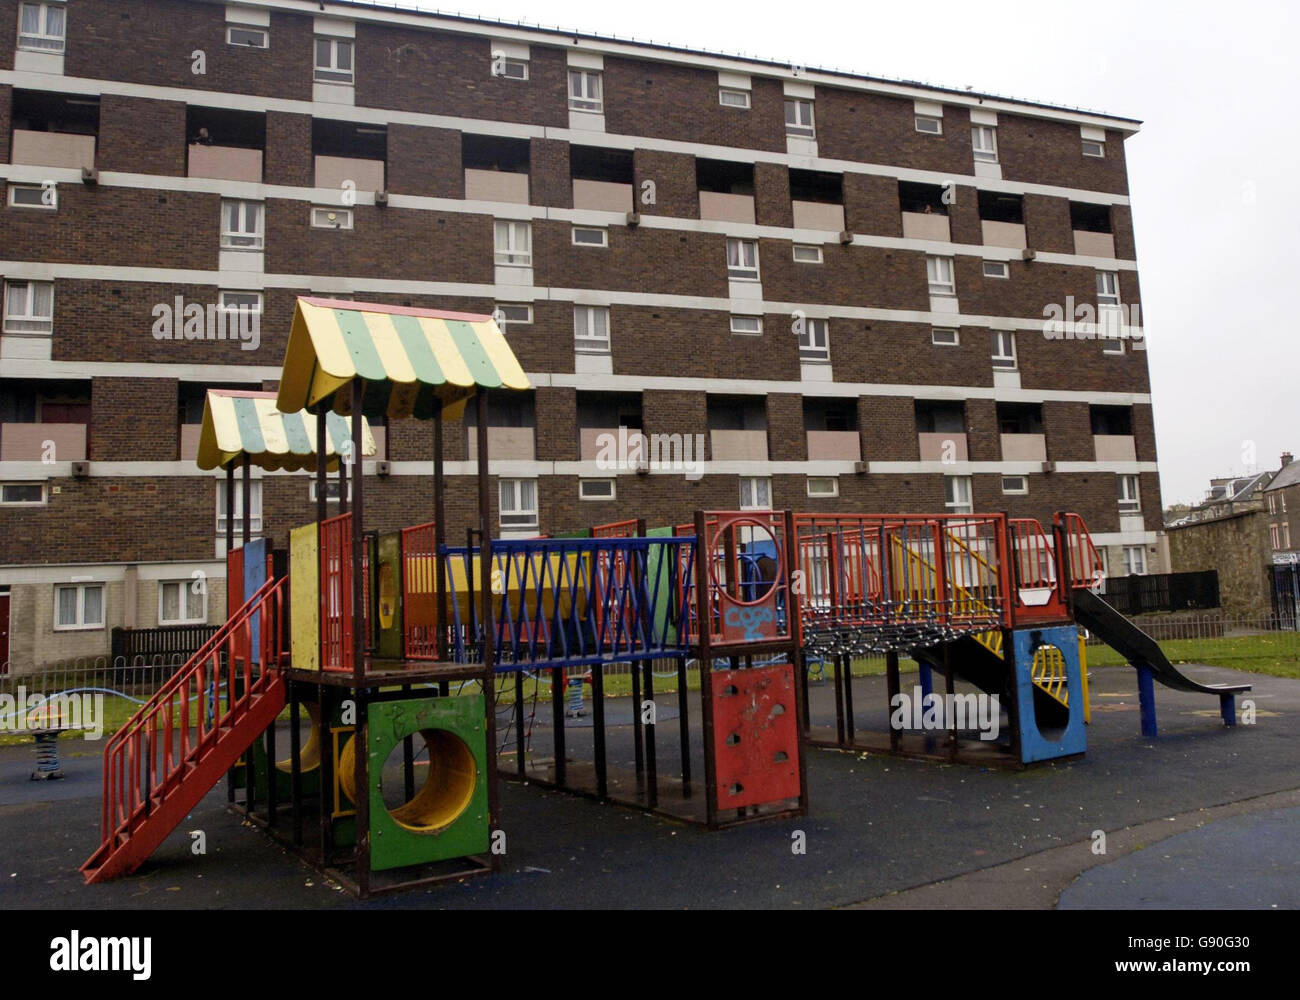 The block of flats in the Leith area of Edinburgh, Wednesday October 19, 2005, where three-year-old Michael survived alone for two weeks alongside the body of his dead mother 33-year-old Anne-Marie McGarrity. Michael is believed to have survived on crisps, fruit juice and the contents of the fridge. See PA Story POLICE Child. PRESS ASSOCIATION Photo. Photo credit should read: Danny Lawson/PA Stock Photo